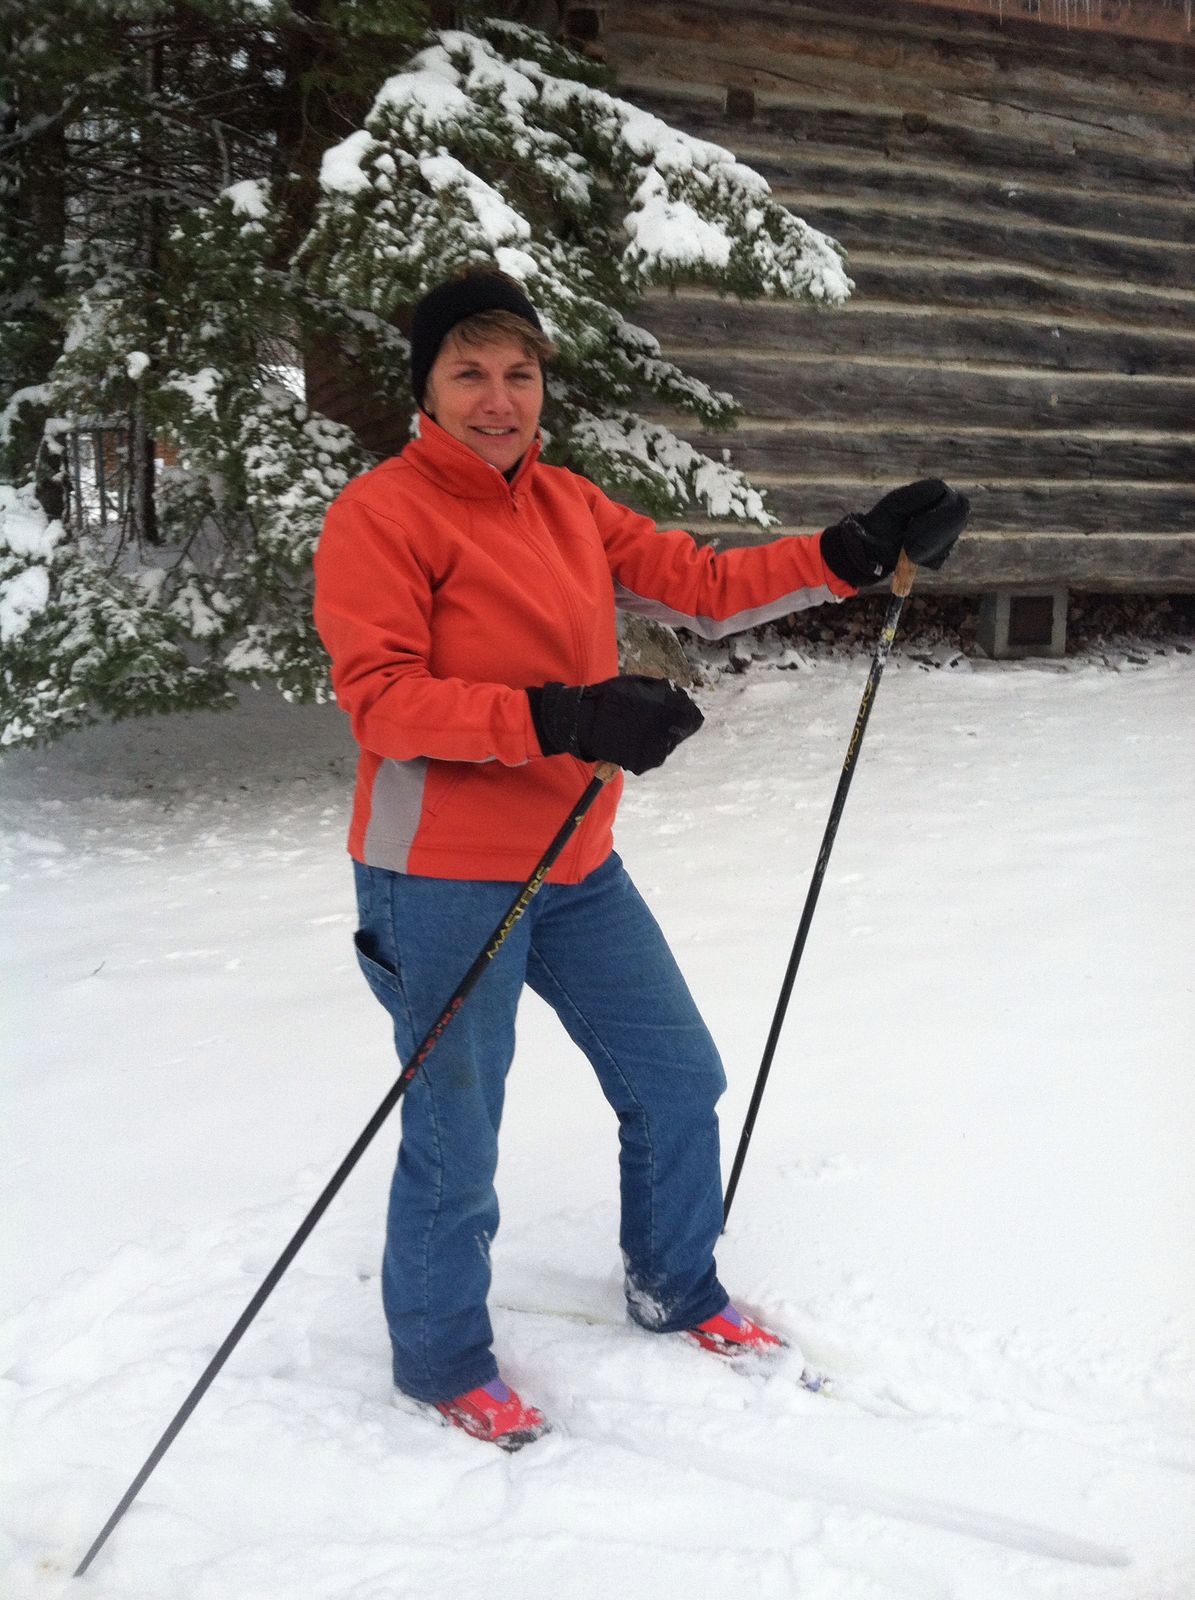 local skier Carol getting first tracks today and celebrating one year of being cancer free! November 18th, 2016.